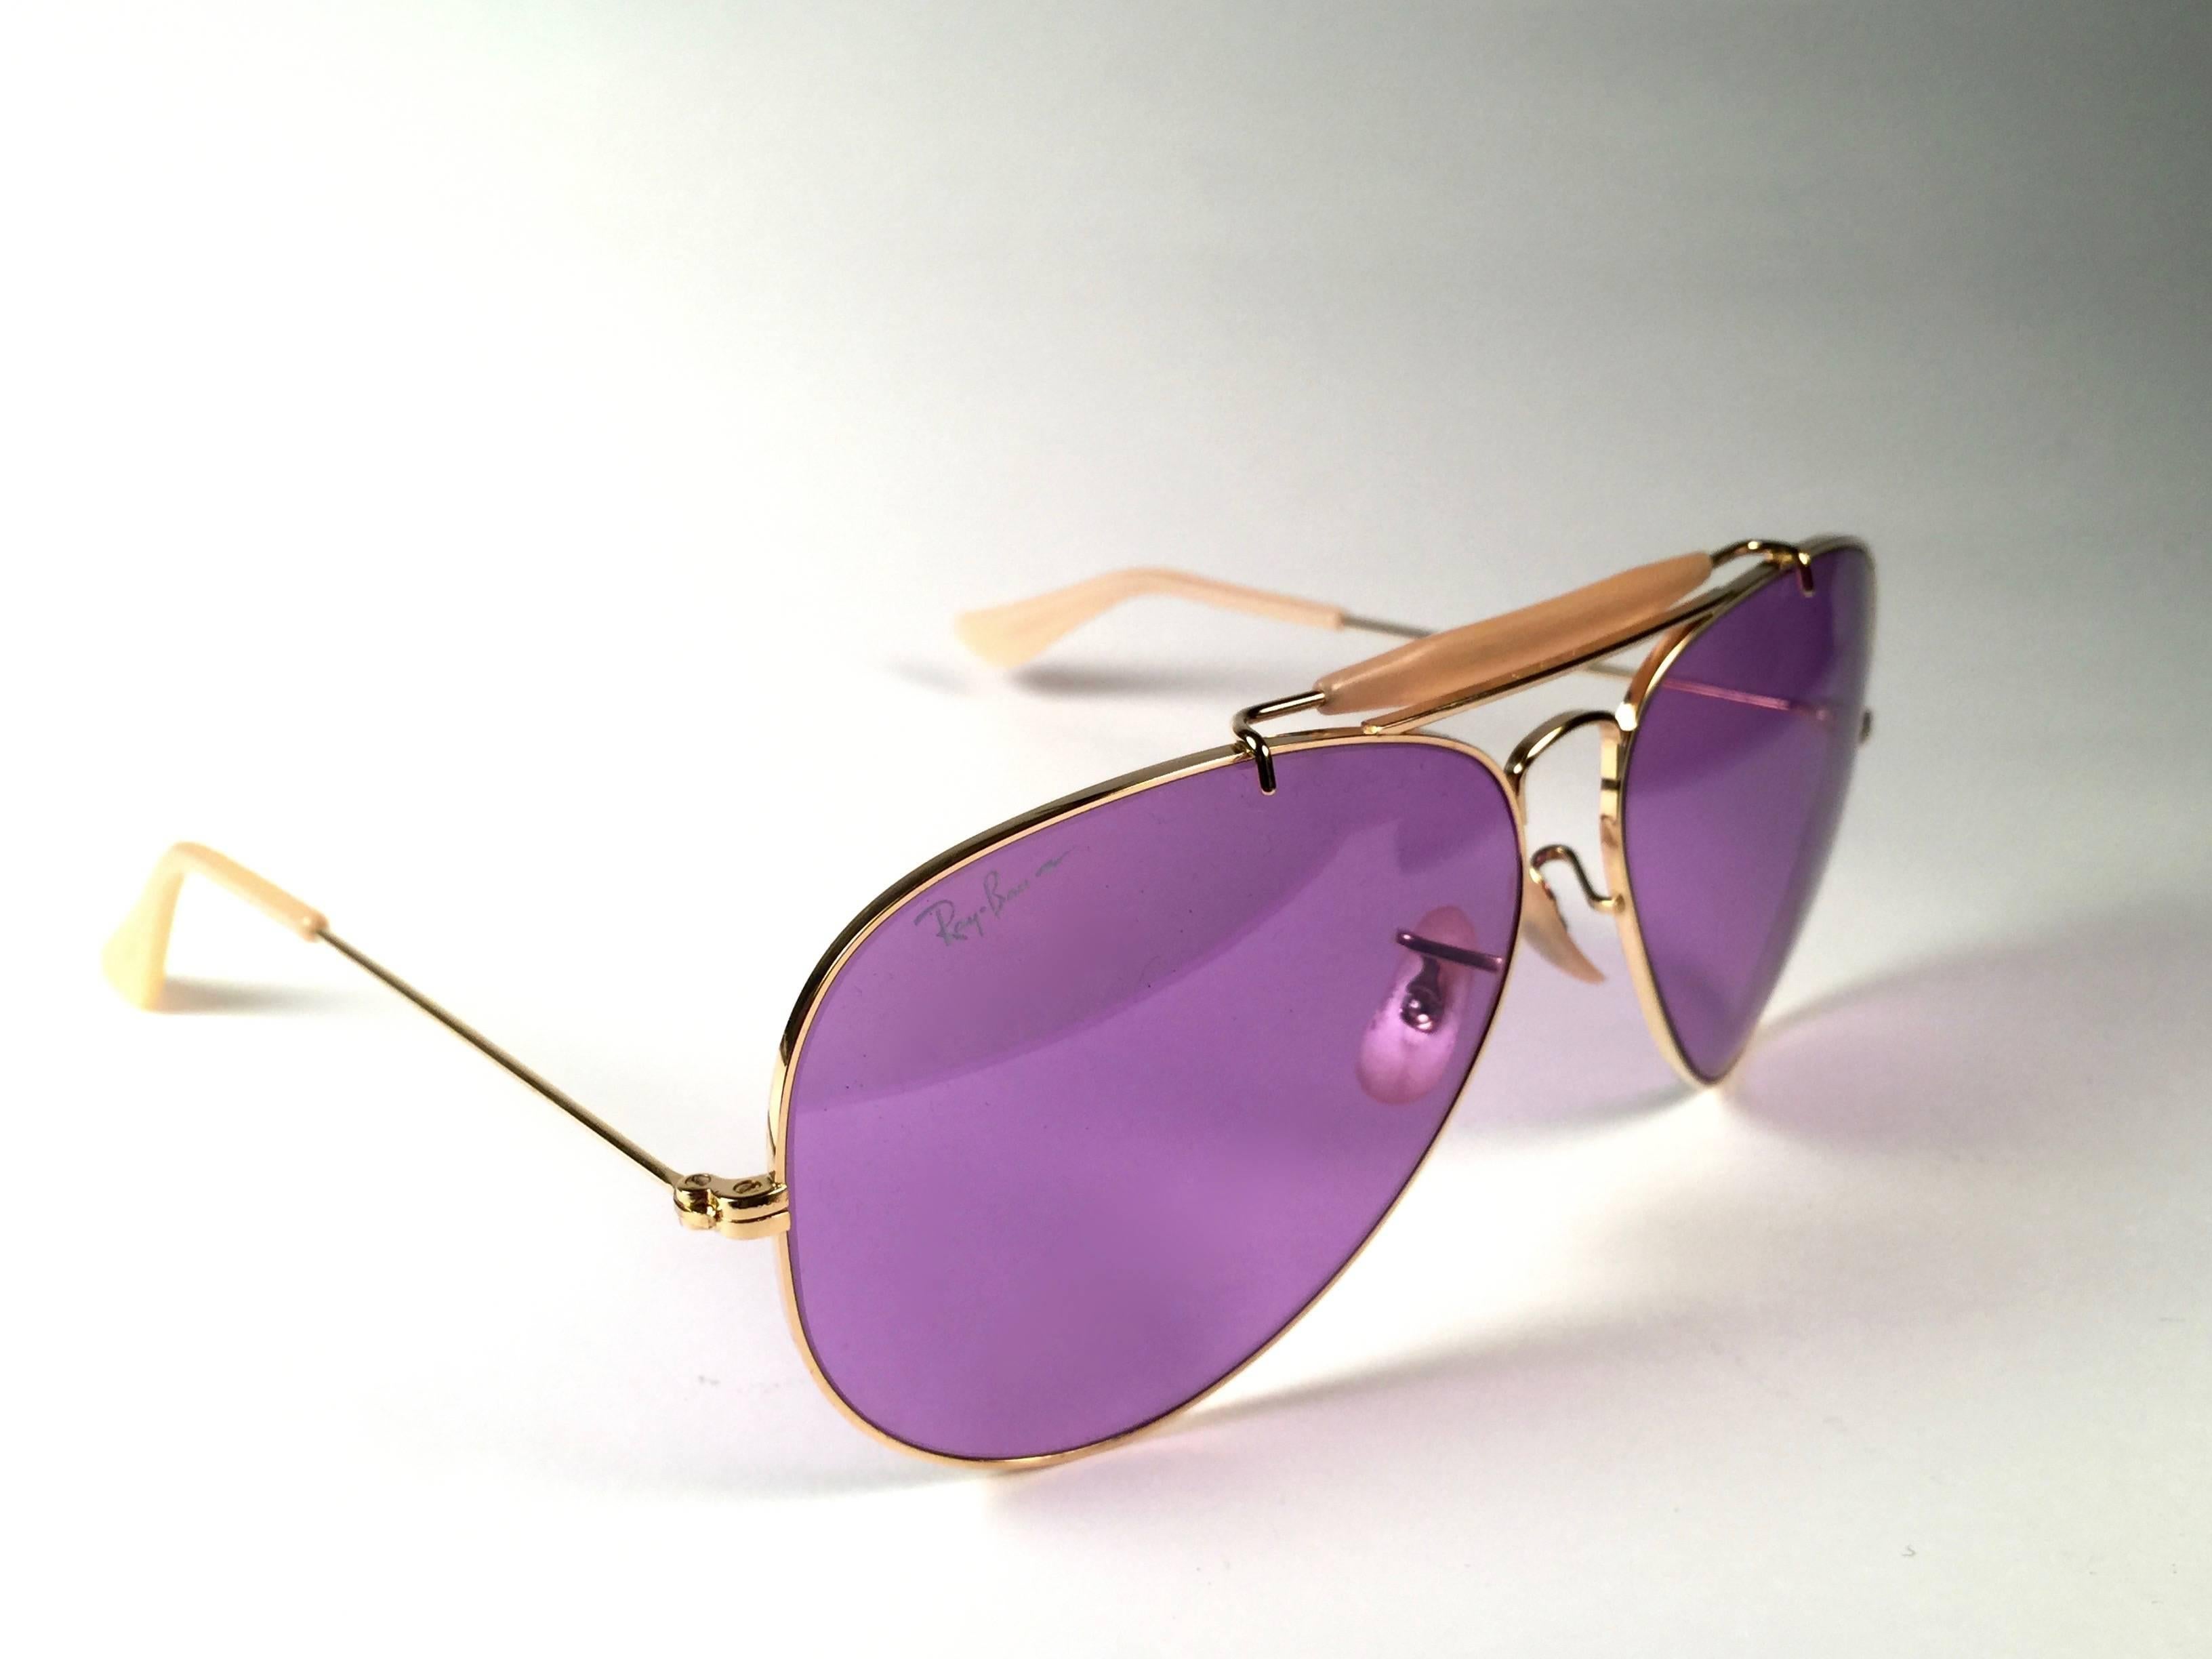 New, rare and sought after Vintage Ray Ban Purple Chromax.  58Mm outdoorsman gold frame holding a pair of purple Chromax B&L etched lenses.  New, never worn or displayed, this item is a superb find. It may have minor sign of wear due to storage.